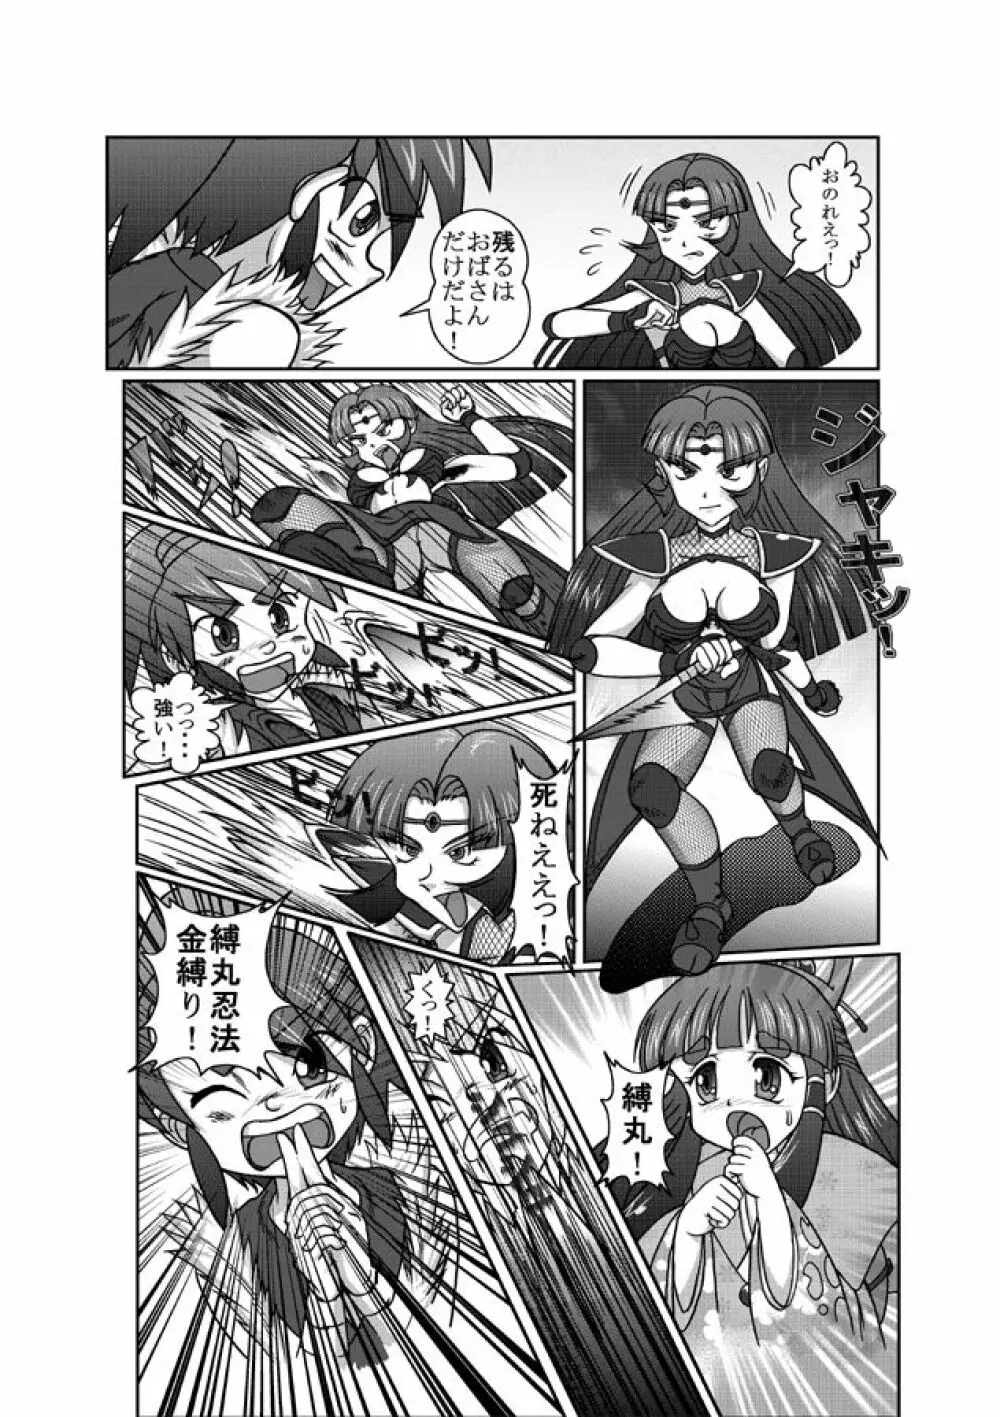 Same-themed manga about kid fighting female ninjas from japanese imageboard. Page.28